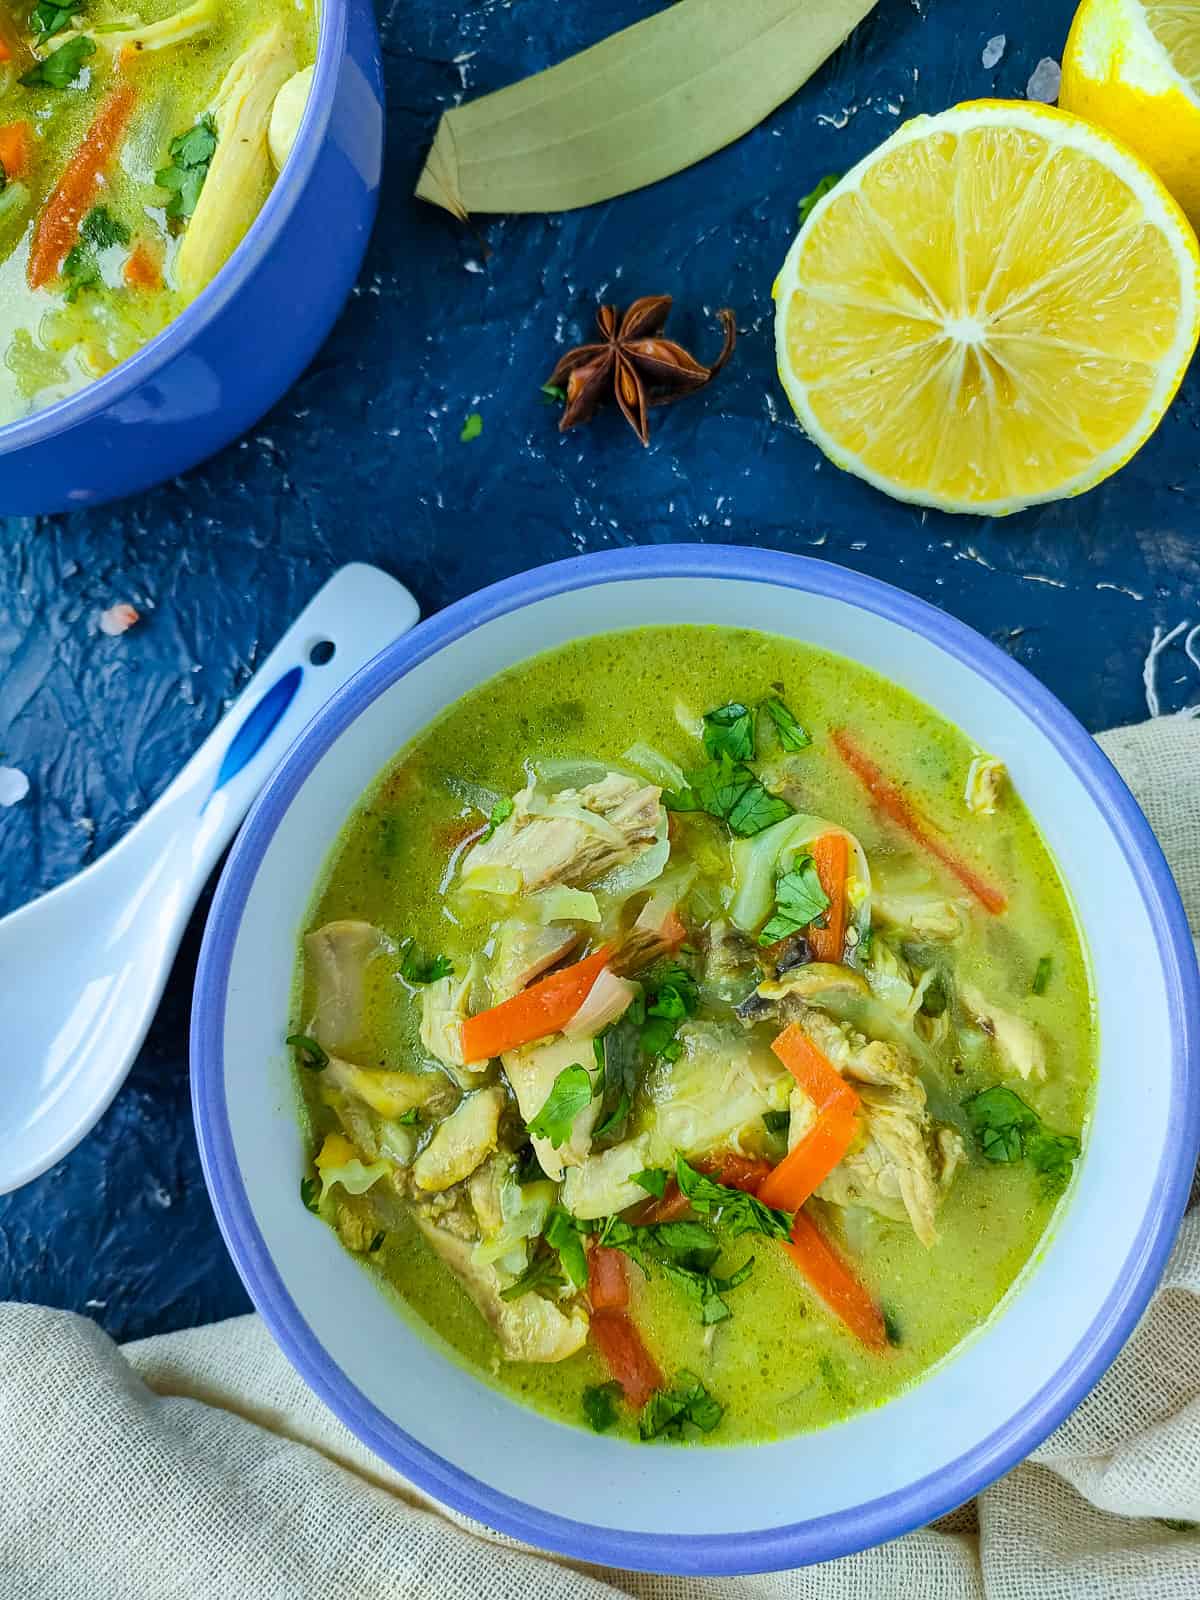 Chicken lemon coriander soup in a white and blue bowl.